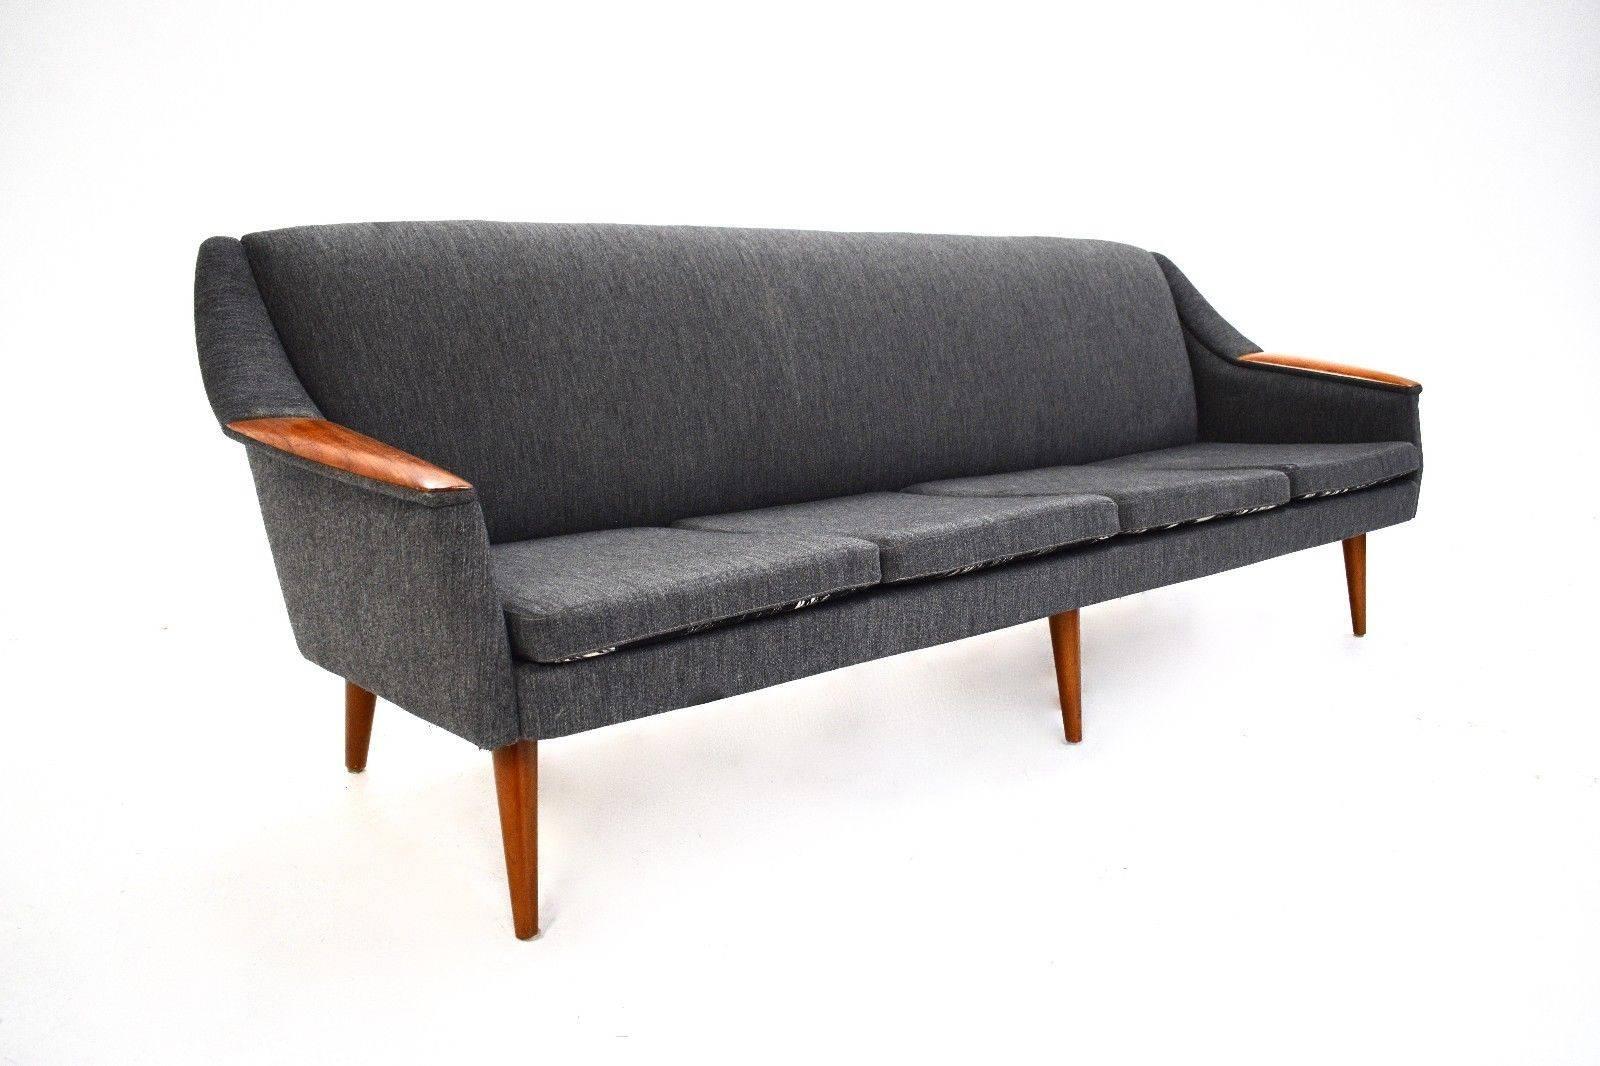 A beautiful Norwegian grey wool and teak four-seat sofa, this would make a stylish addition to any living or work area. The sofa has a padded backrest and sculptured teak armrests for enhanced comfort. The cushions are reversible and have a